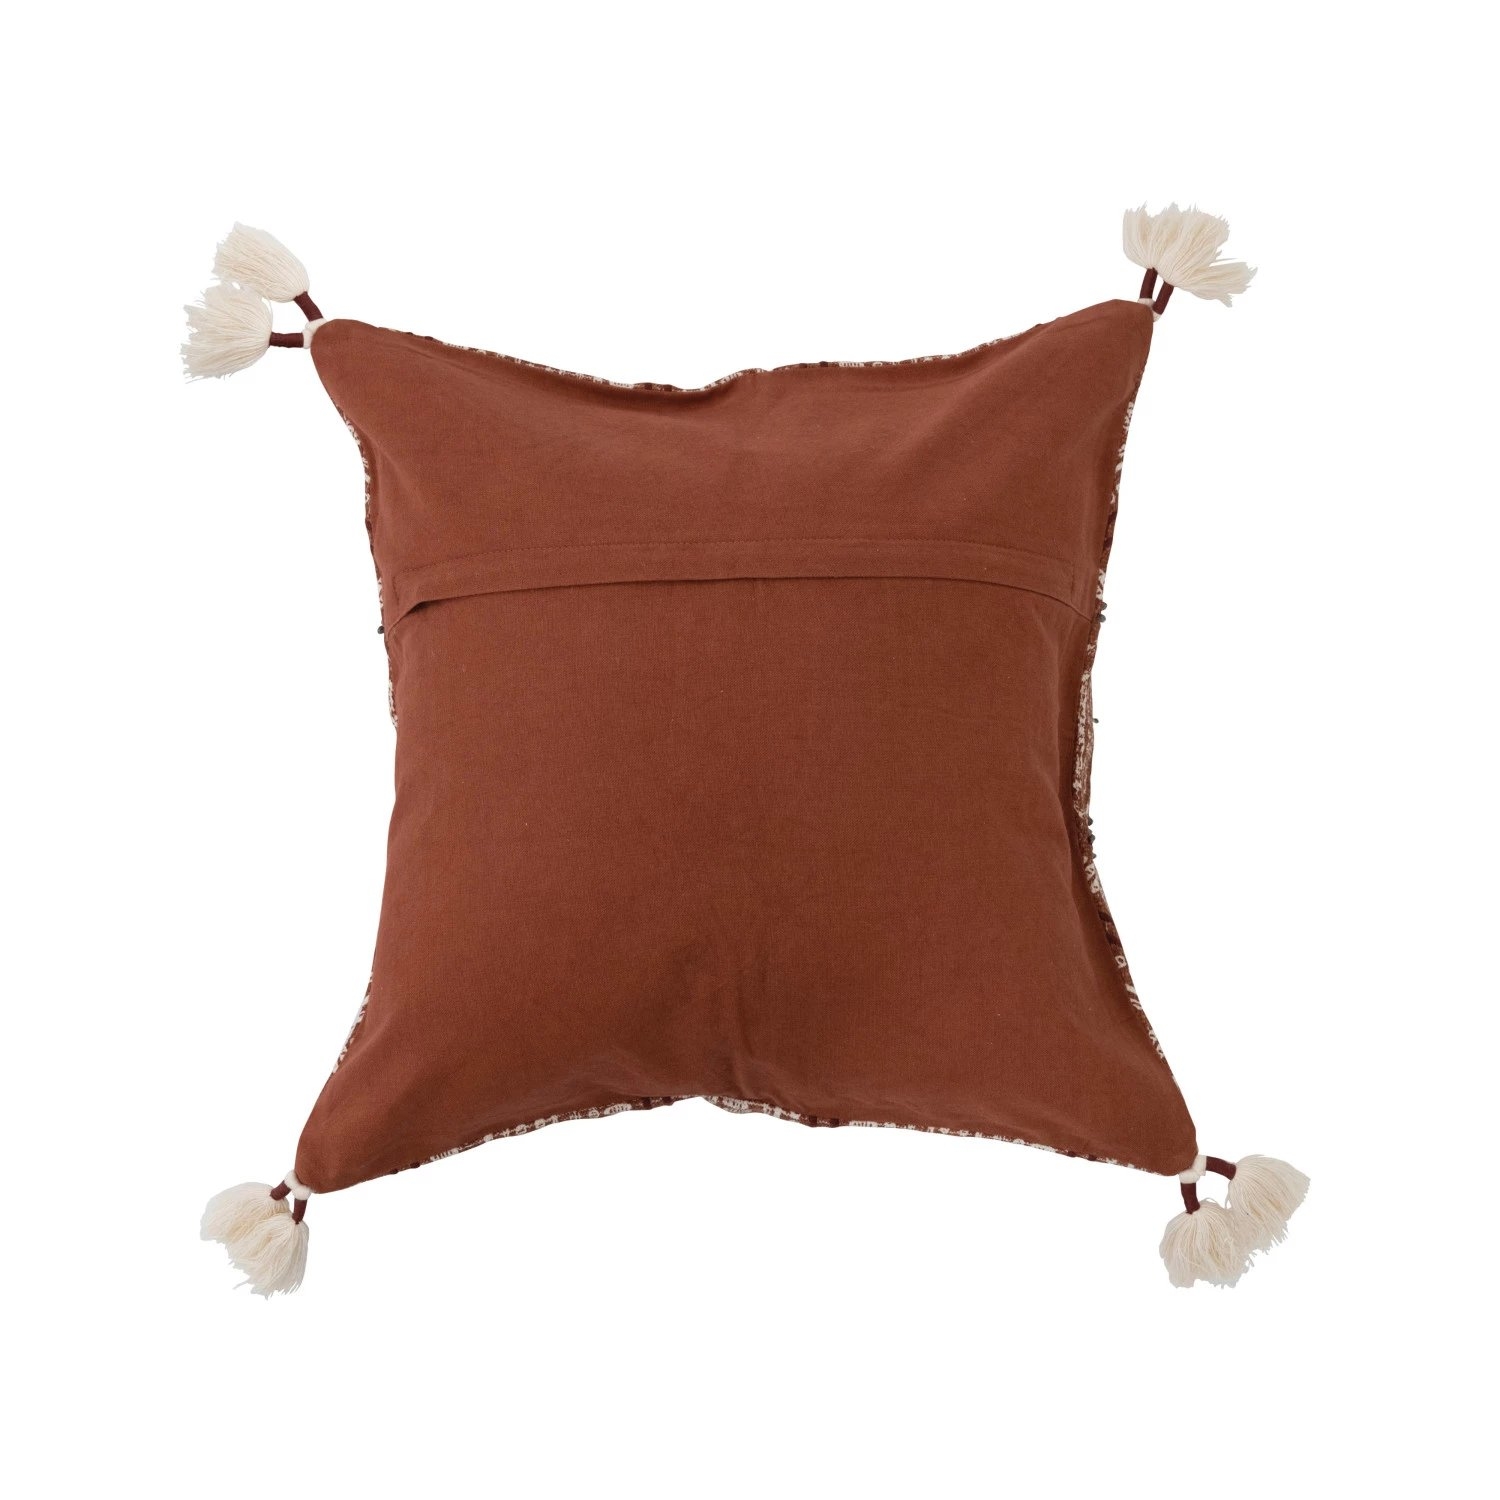 18" Cotton Printed Pillow w/ Embroidery & Tassels, Polyester Fill - Image 1